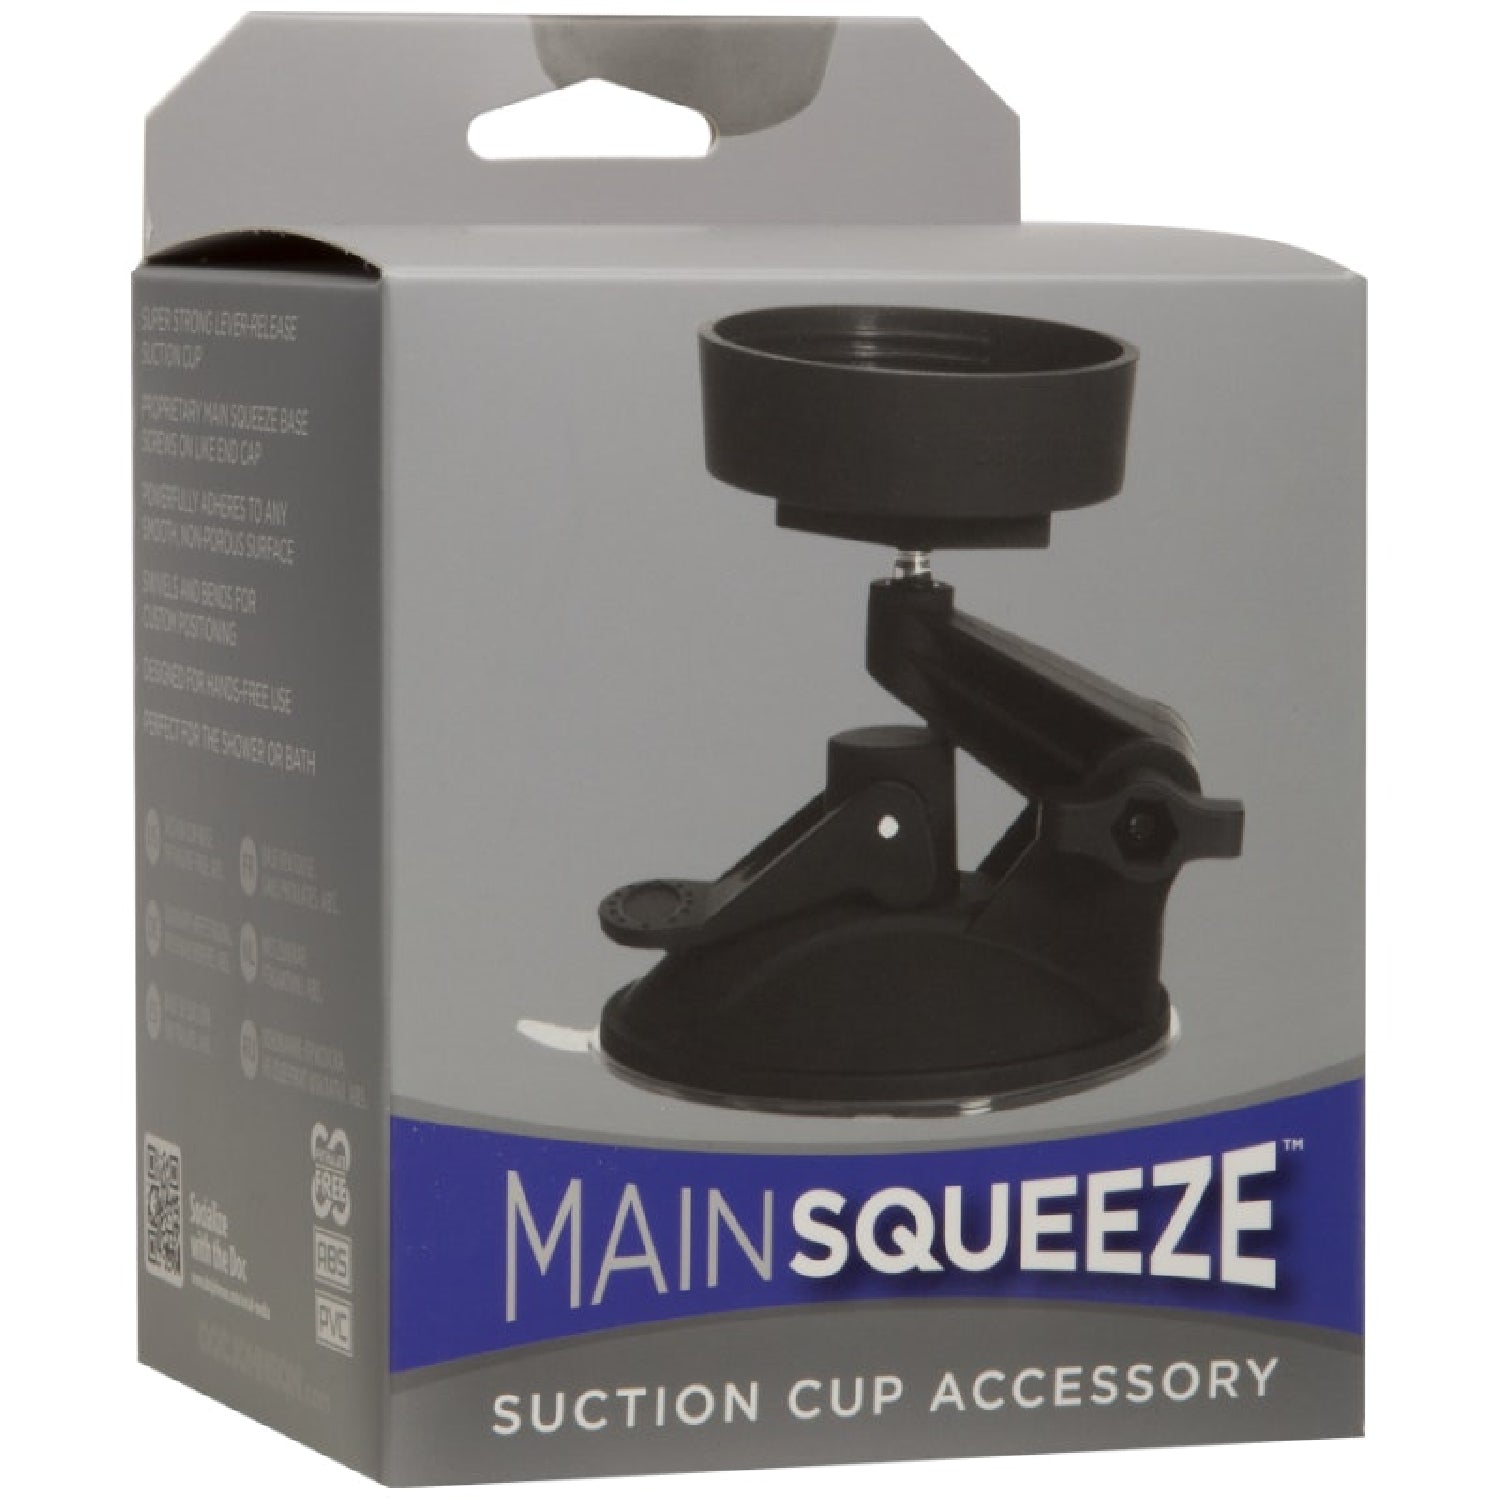 Main Squeeze - Suction Cup Accessory - Black